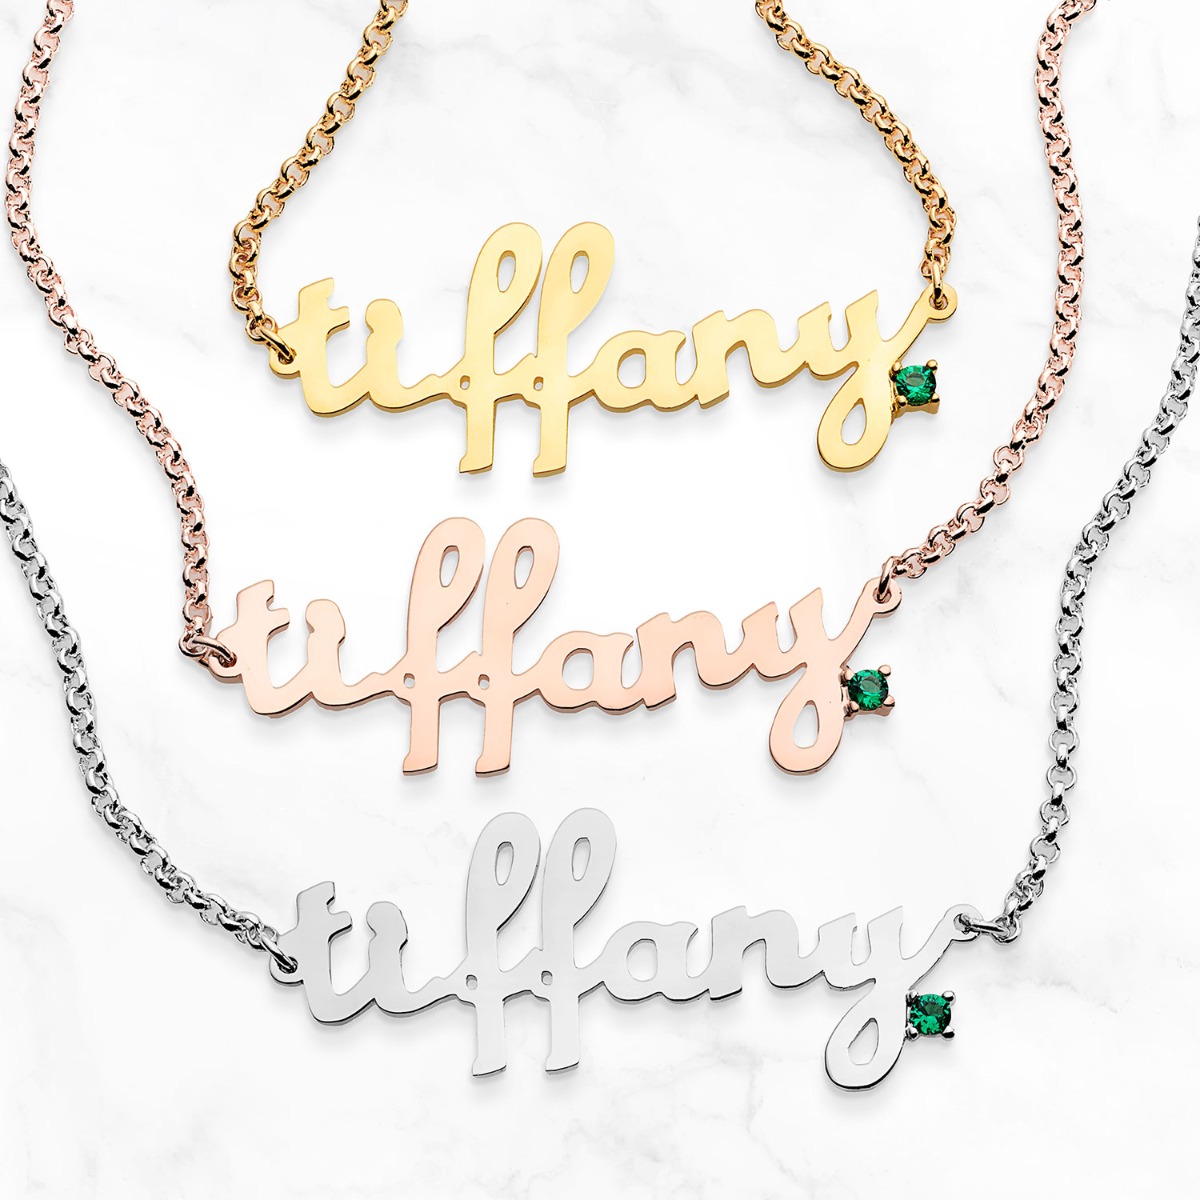 Personalized Lowercase Script Name with Birthstone Accent Necklace